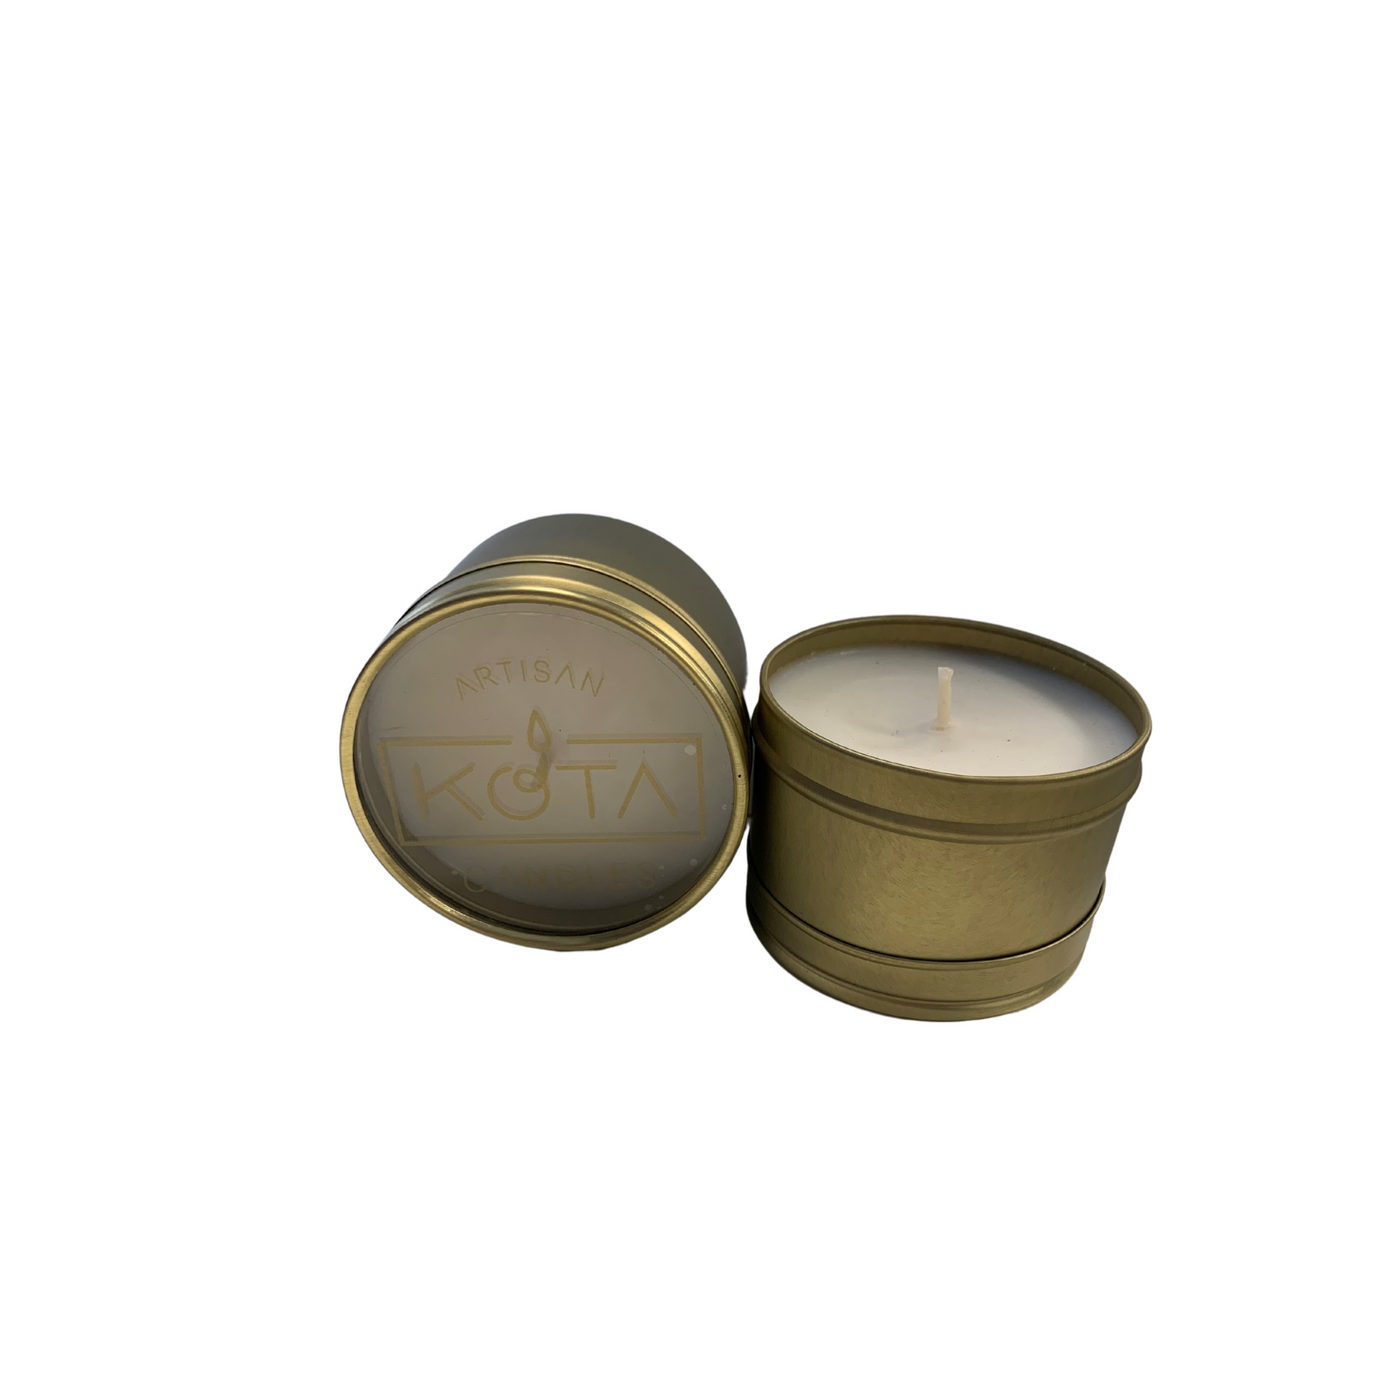 Kota Candles Gold Tin Happy Hour Scent
Hour Scent